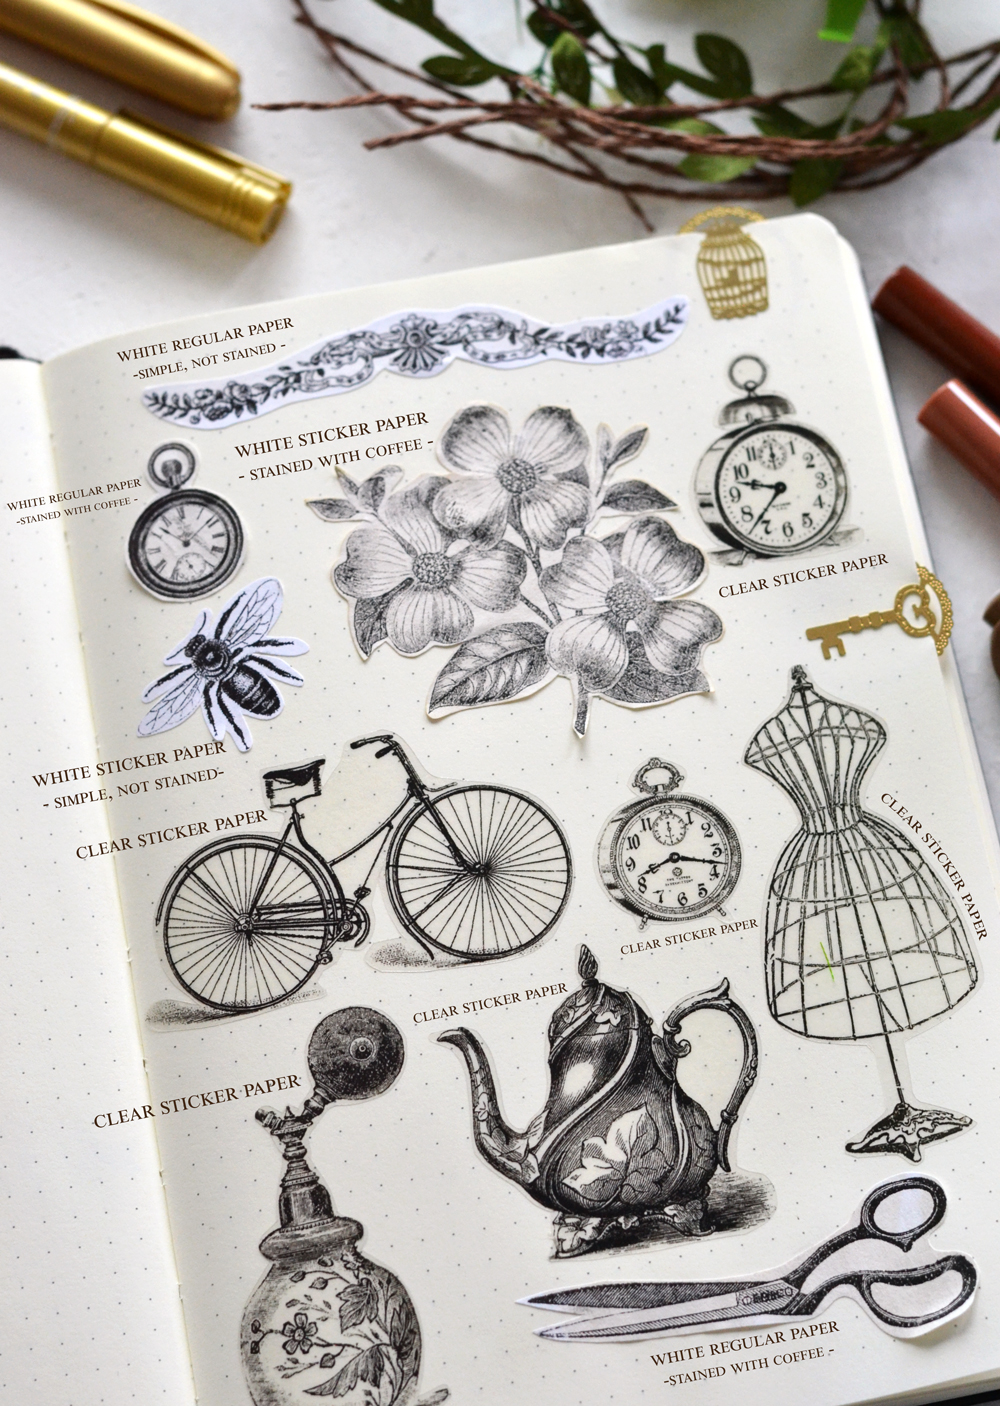 Learn how to make some amazing DIY vintage stickers using 3 types of paper ...and some coffee (to give the stickers a beautiful, antiqued look) #DIY #bulletjournal #stickers #vintage #crafts